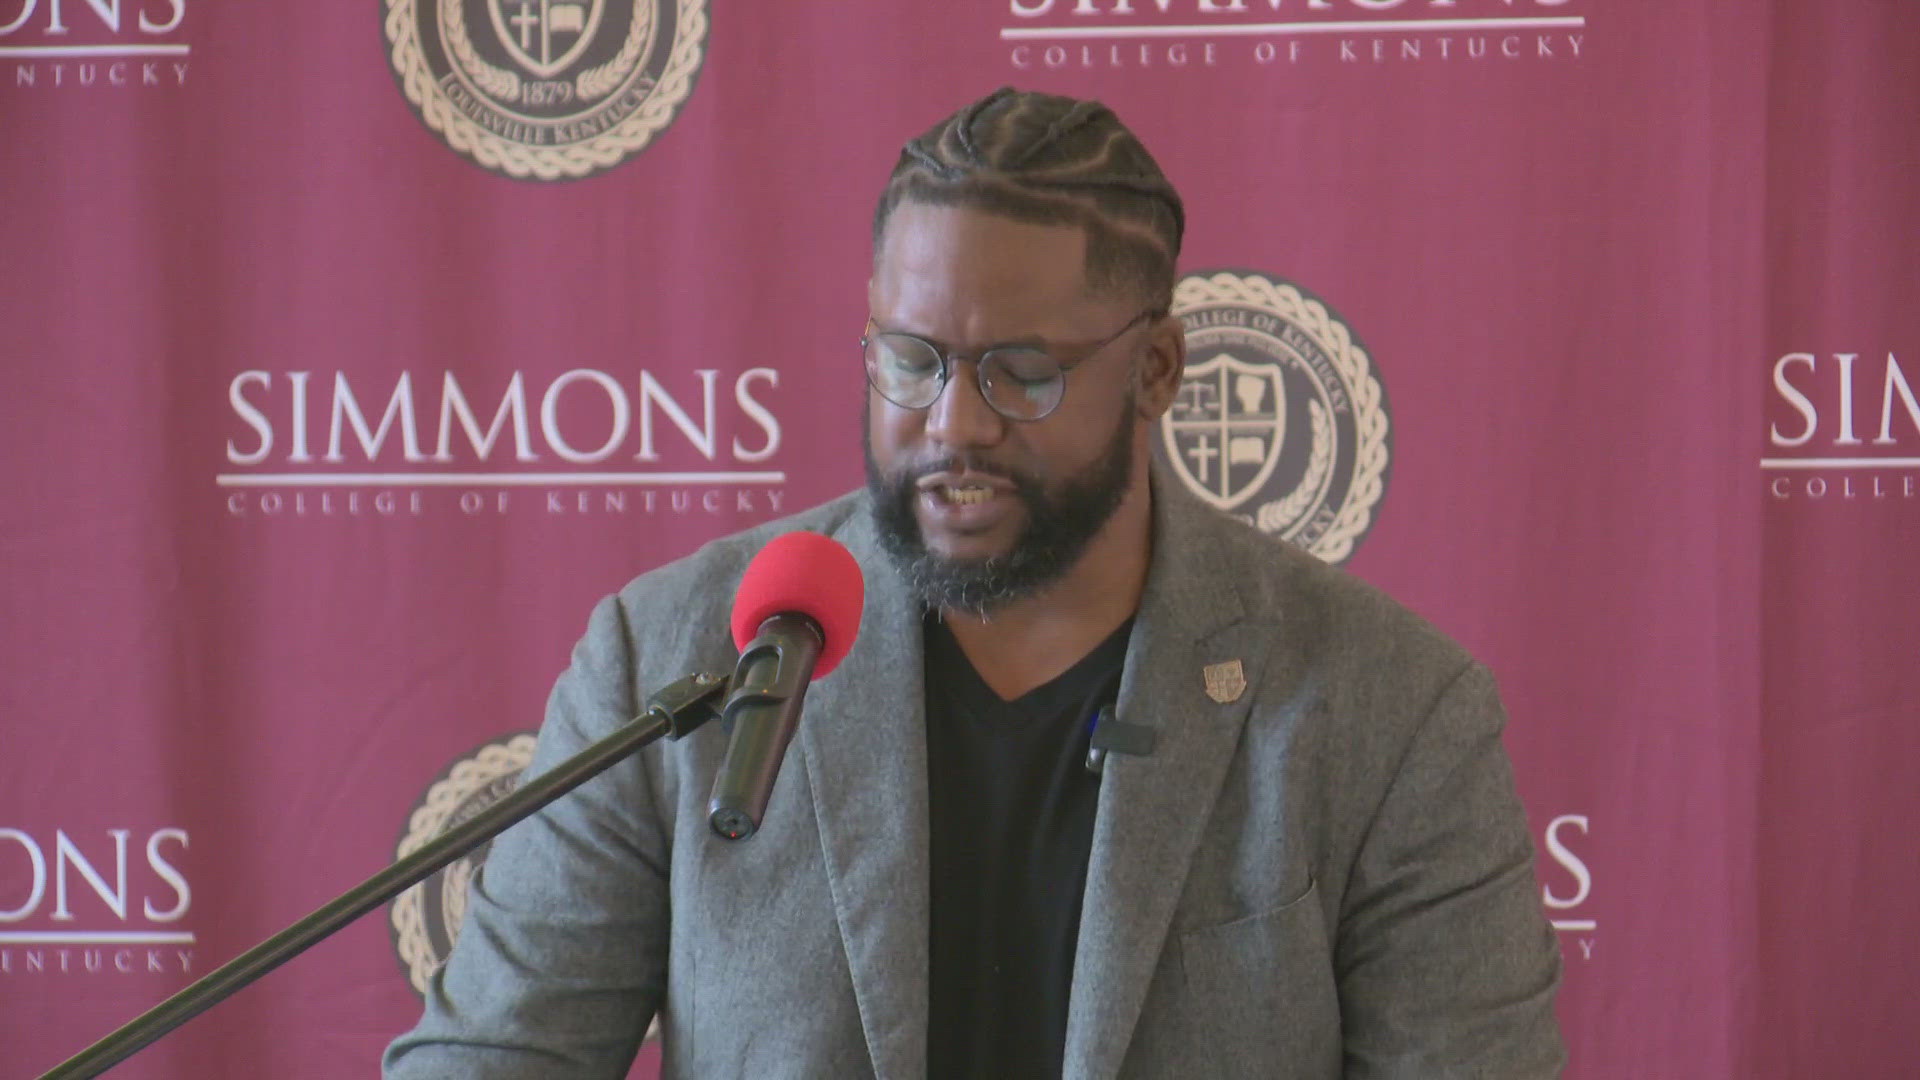 The historical Black university announced it's 'Open Doors Initiative' -- a program dedicated to addressing the houseless epidemic in our city and country.